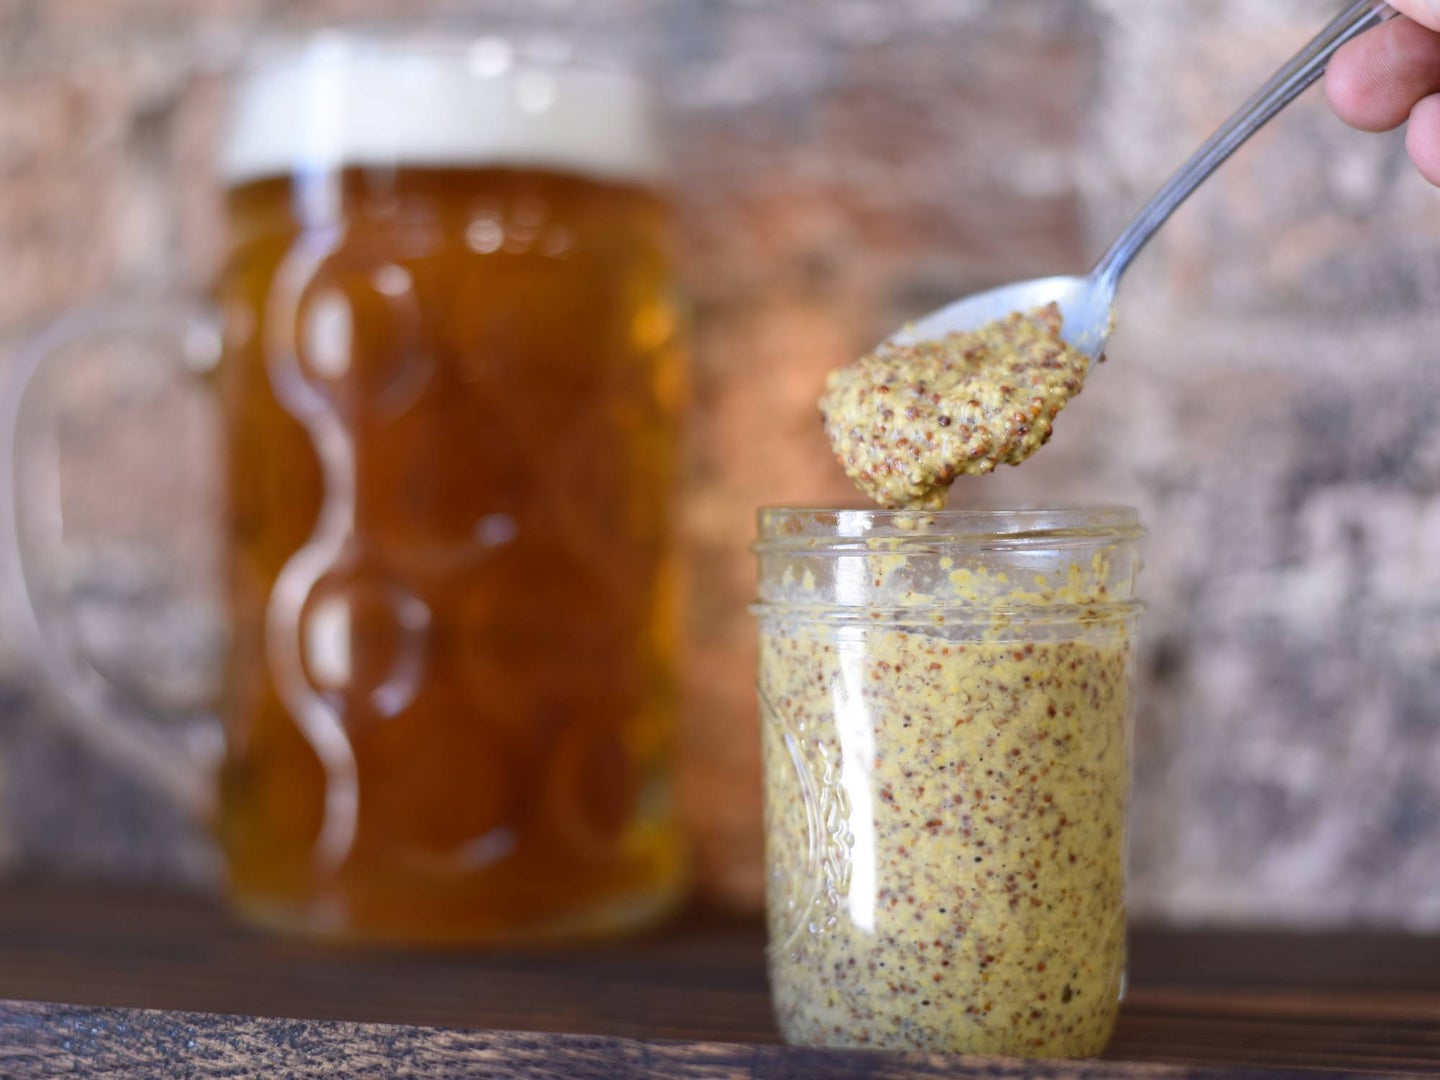 jar of mustard with pitcher of beer in the background